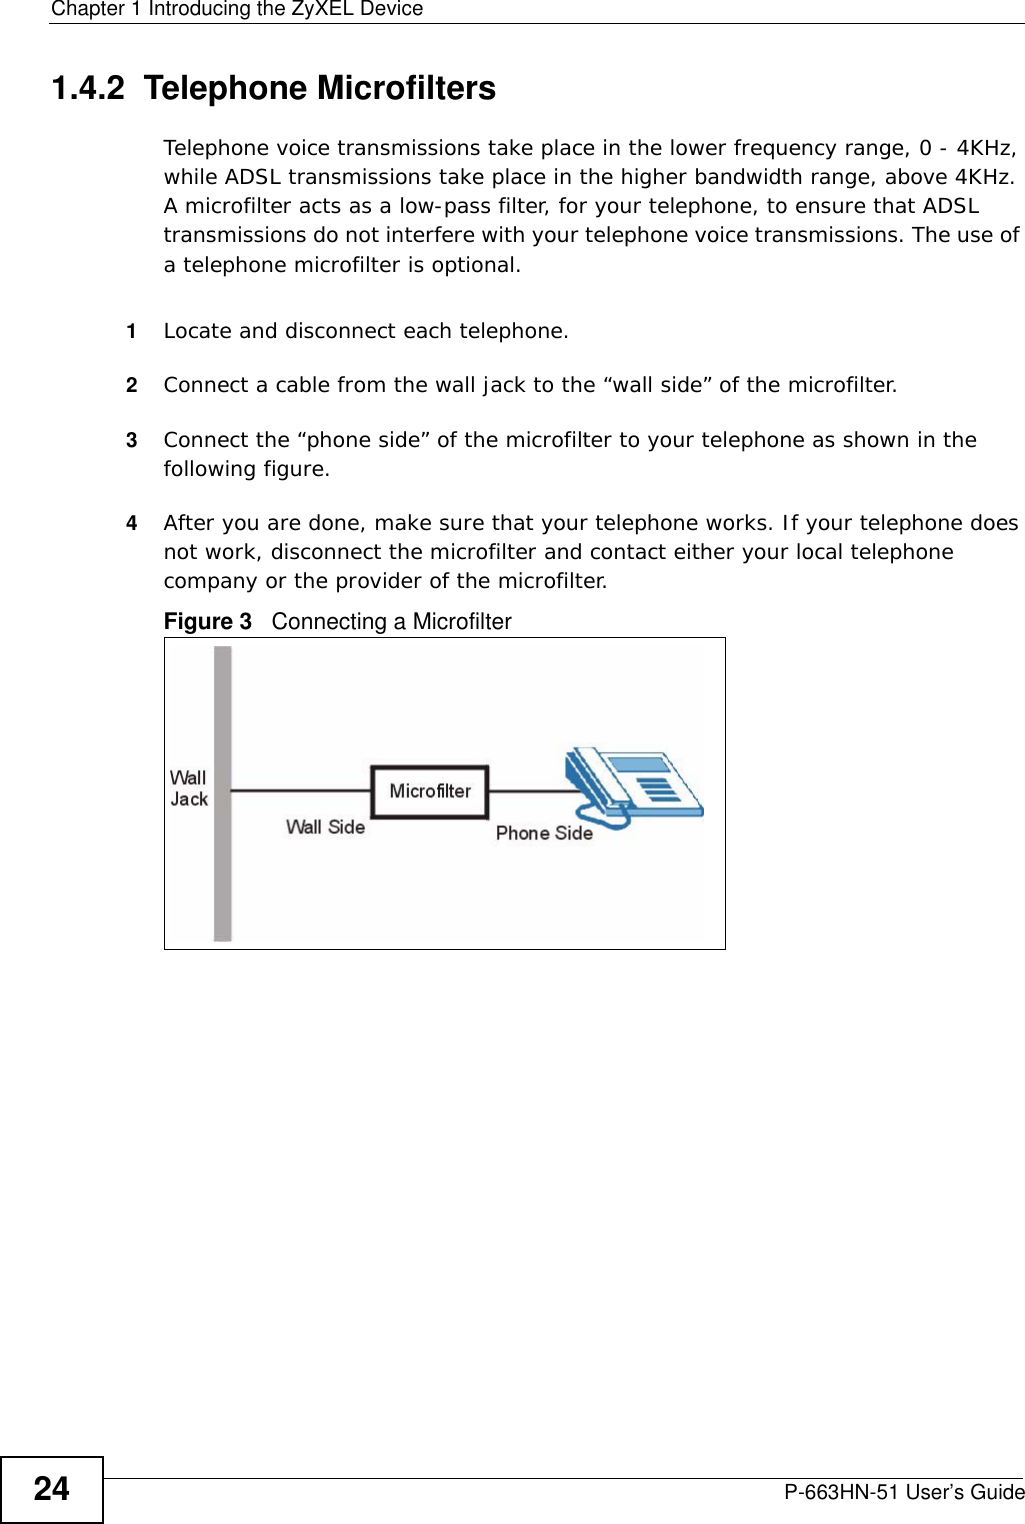 Chapter 1 Introducing the ZyXEL DeviceP-663HN-51 User’s Guide241.4.2  Telephone MicrofiltersTelephone voice transmissions take place in the lower frequency range, 0 - 4KHz, while ADSL transmissions take place in the higher bandwidth range, above 4KHz. A microfilter acts as a low-pass filter, for your telephone, to ensure that ADSL transmissions do not interfere with your telephone voice transmissions. The use of a telephone microfilter is optional. 1Locate and disconnect each telephone. 2Connect a cable from the wall jack to the “wall side” of the microfilter.3Connect the “phone side” of the microfilter to your telephone as shown in the following figure.4After you are done, make sure that your telephone works. If your telephone does not work, disconnect the microfilter and contact either your local telephone company or the provider of the microfilter.Figure 3   Connecting a Microfilter